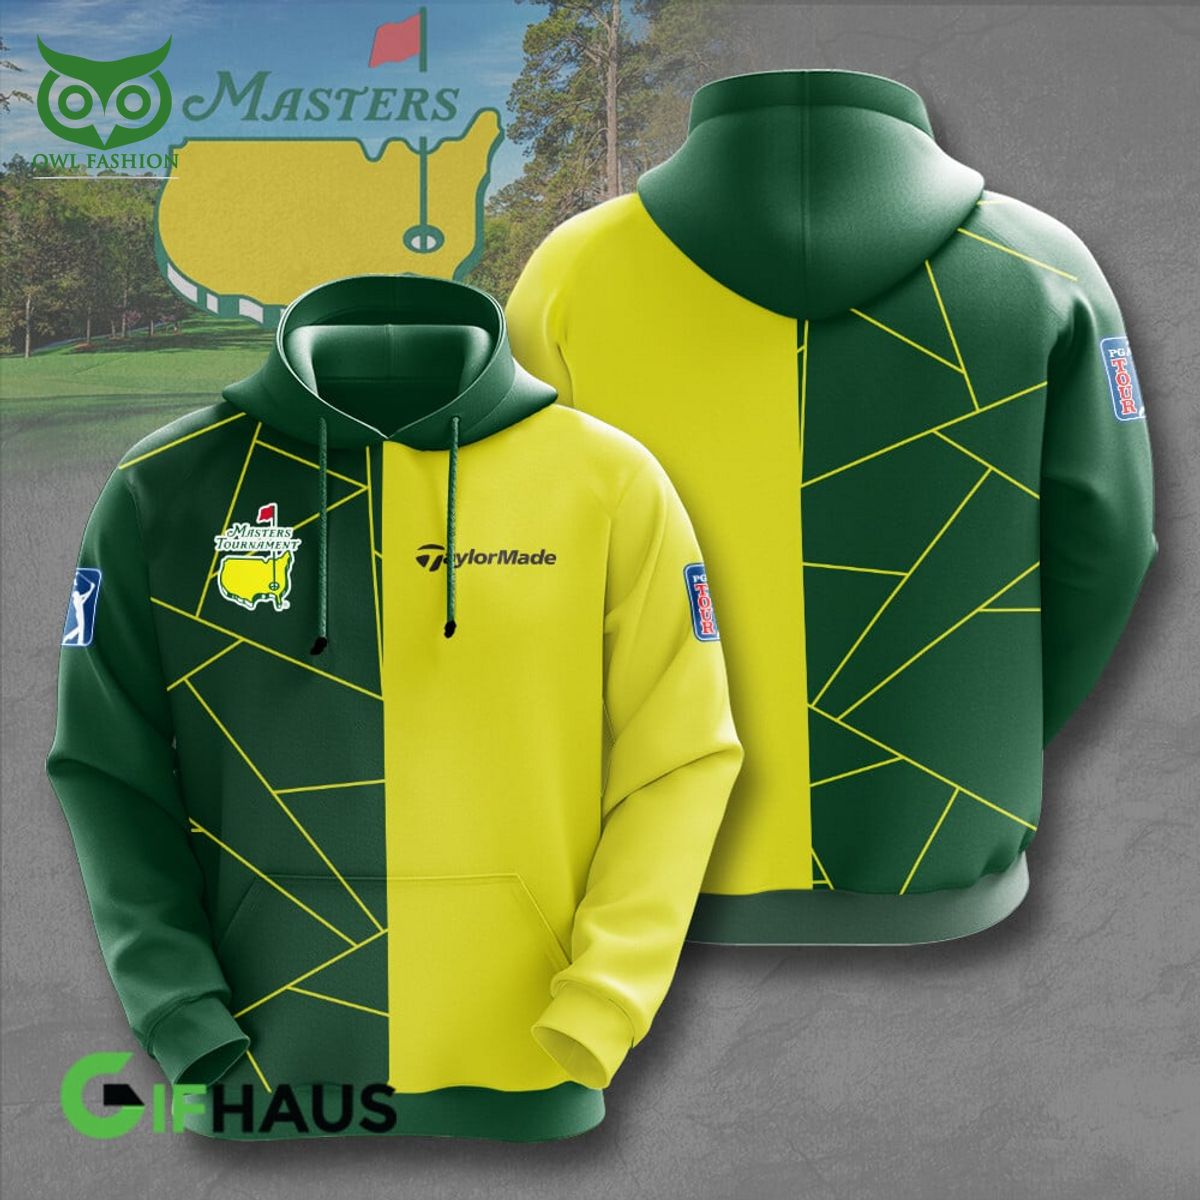 taylor made golf master tournament 3d polo hoodie longsleeves 1 45mSR